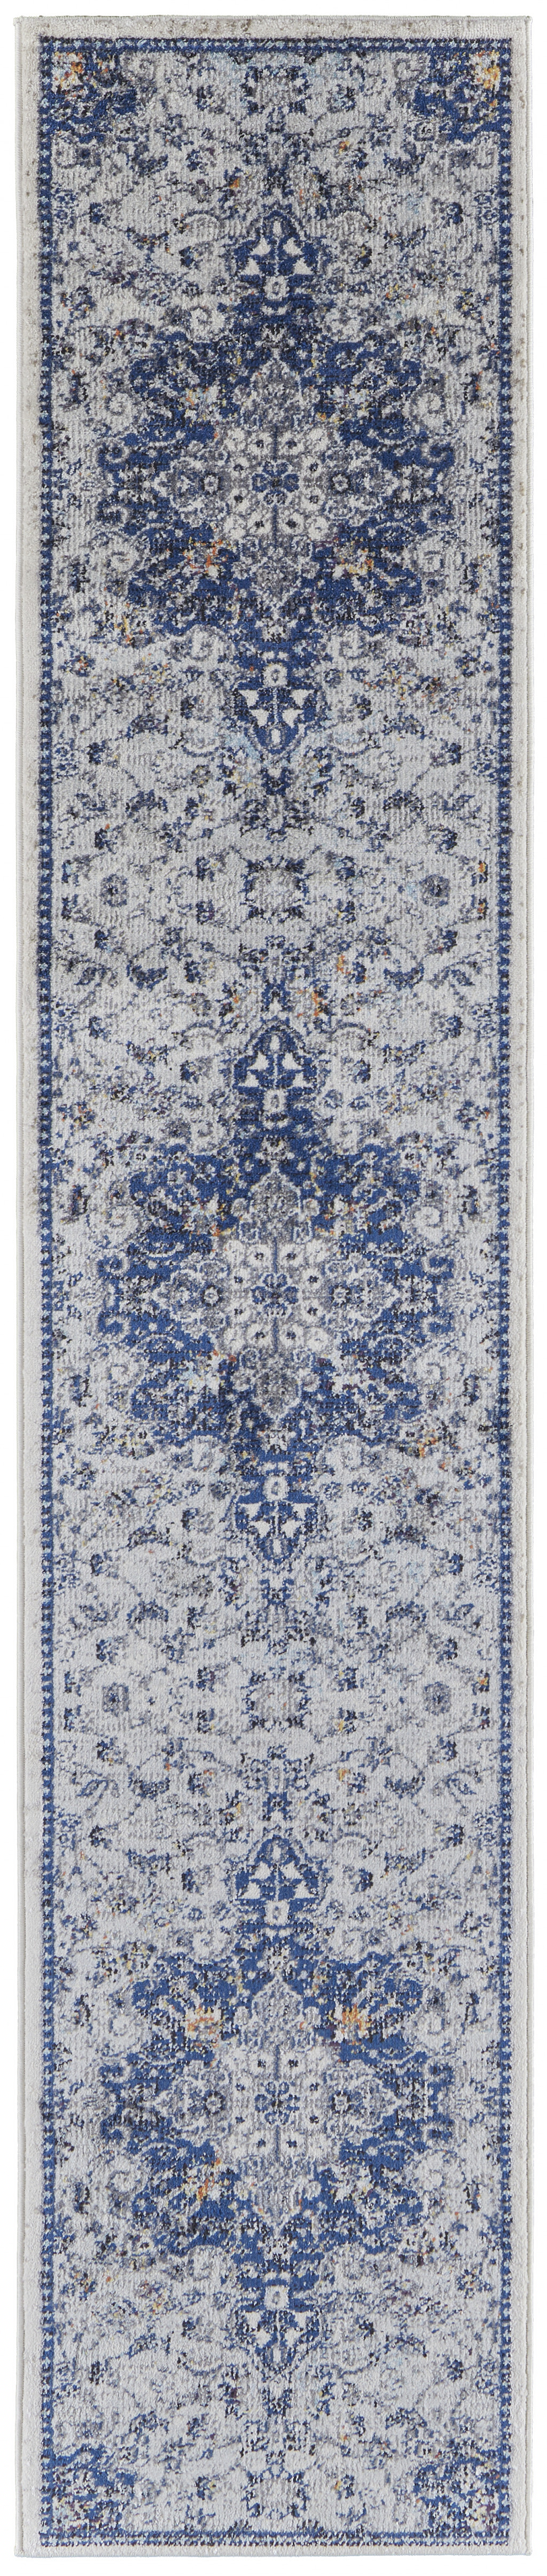 8' Gray Ivory And Blue Floral Power Loom Distressed Stain Resistant Runner Rug-513829-1